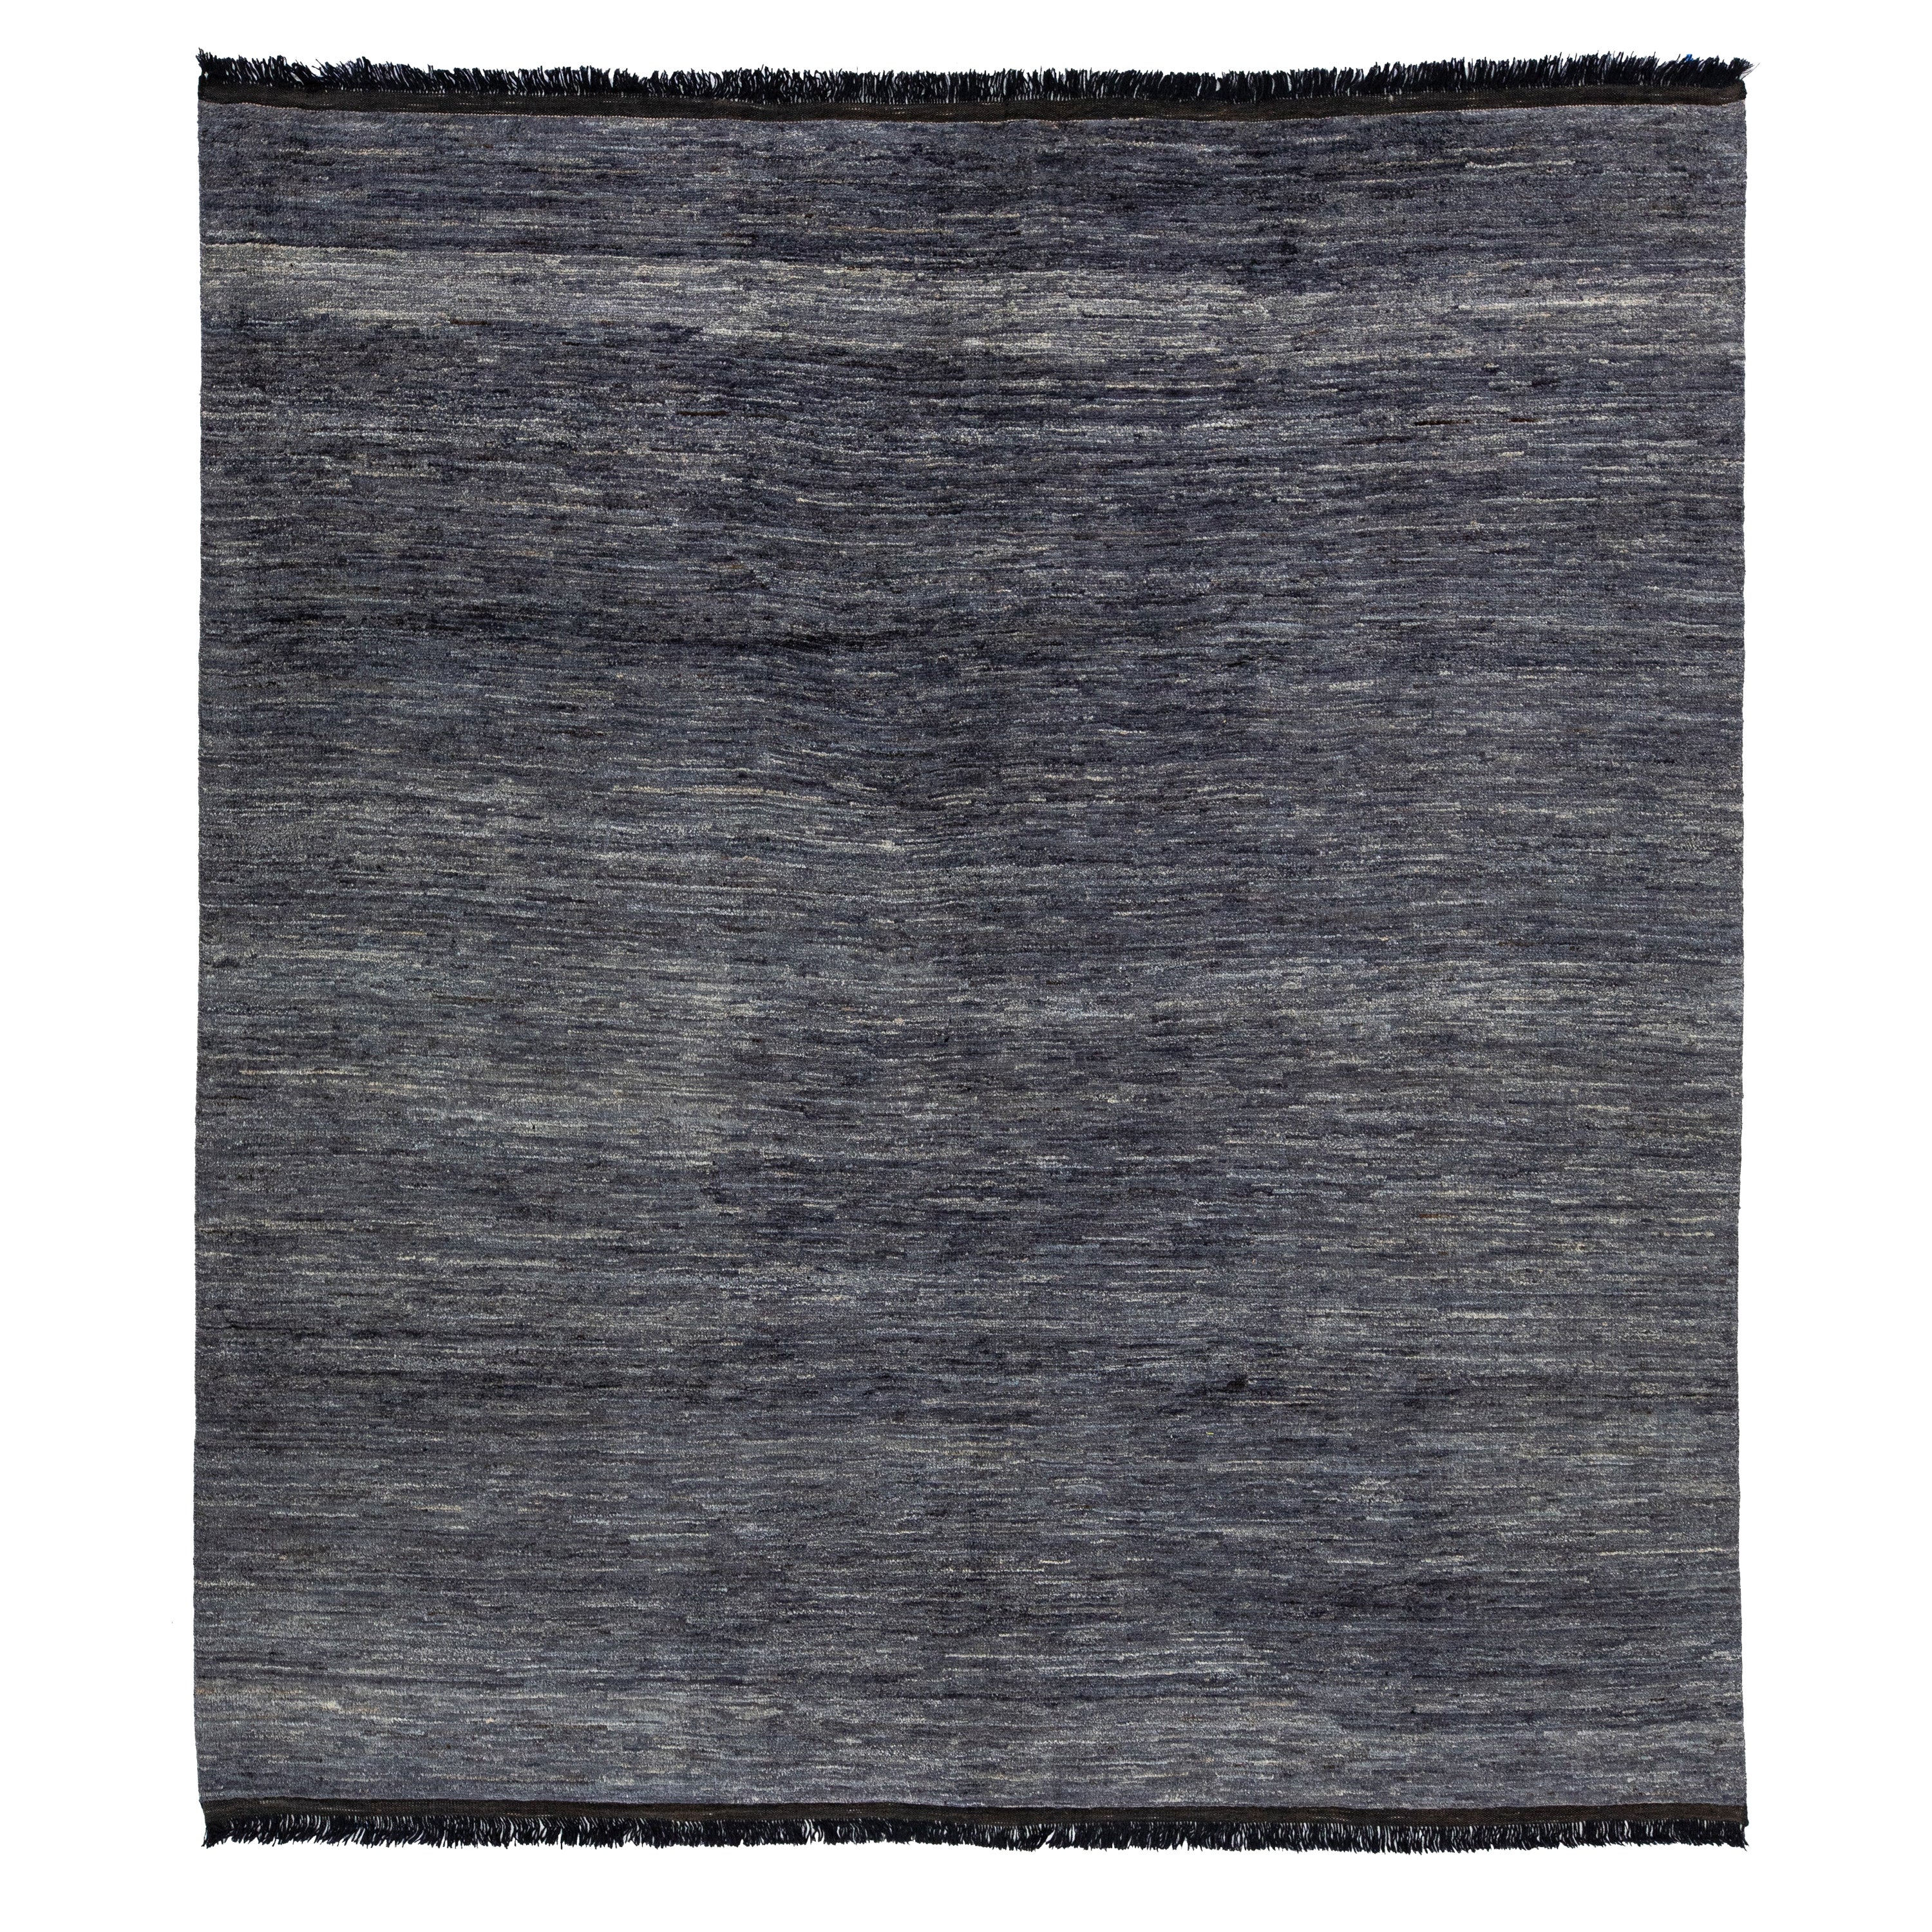 Handmade Contemporary Solid Gabbeh Style Wool Rug In Gray-Charcoal Color For Sale